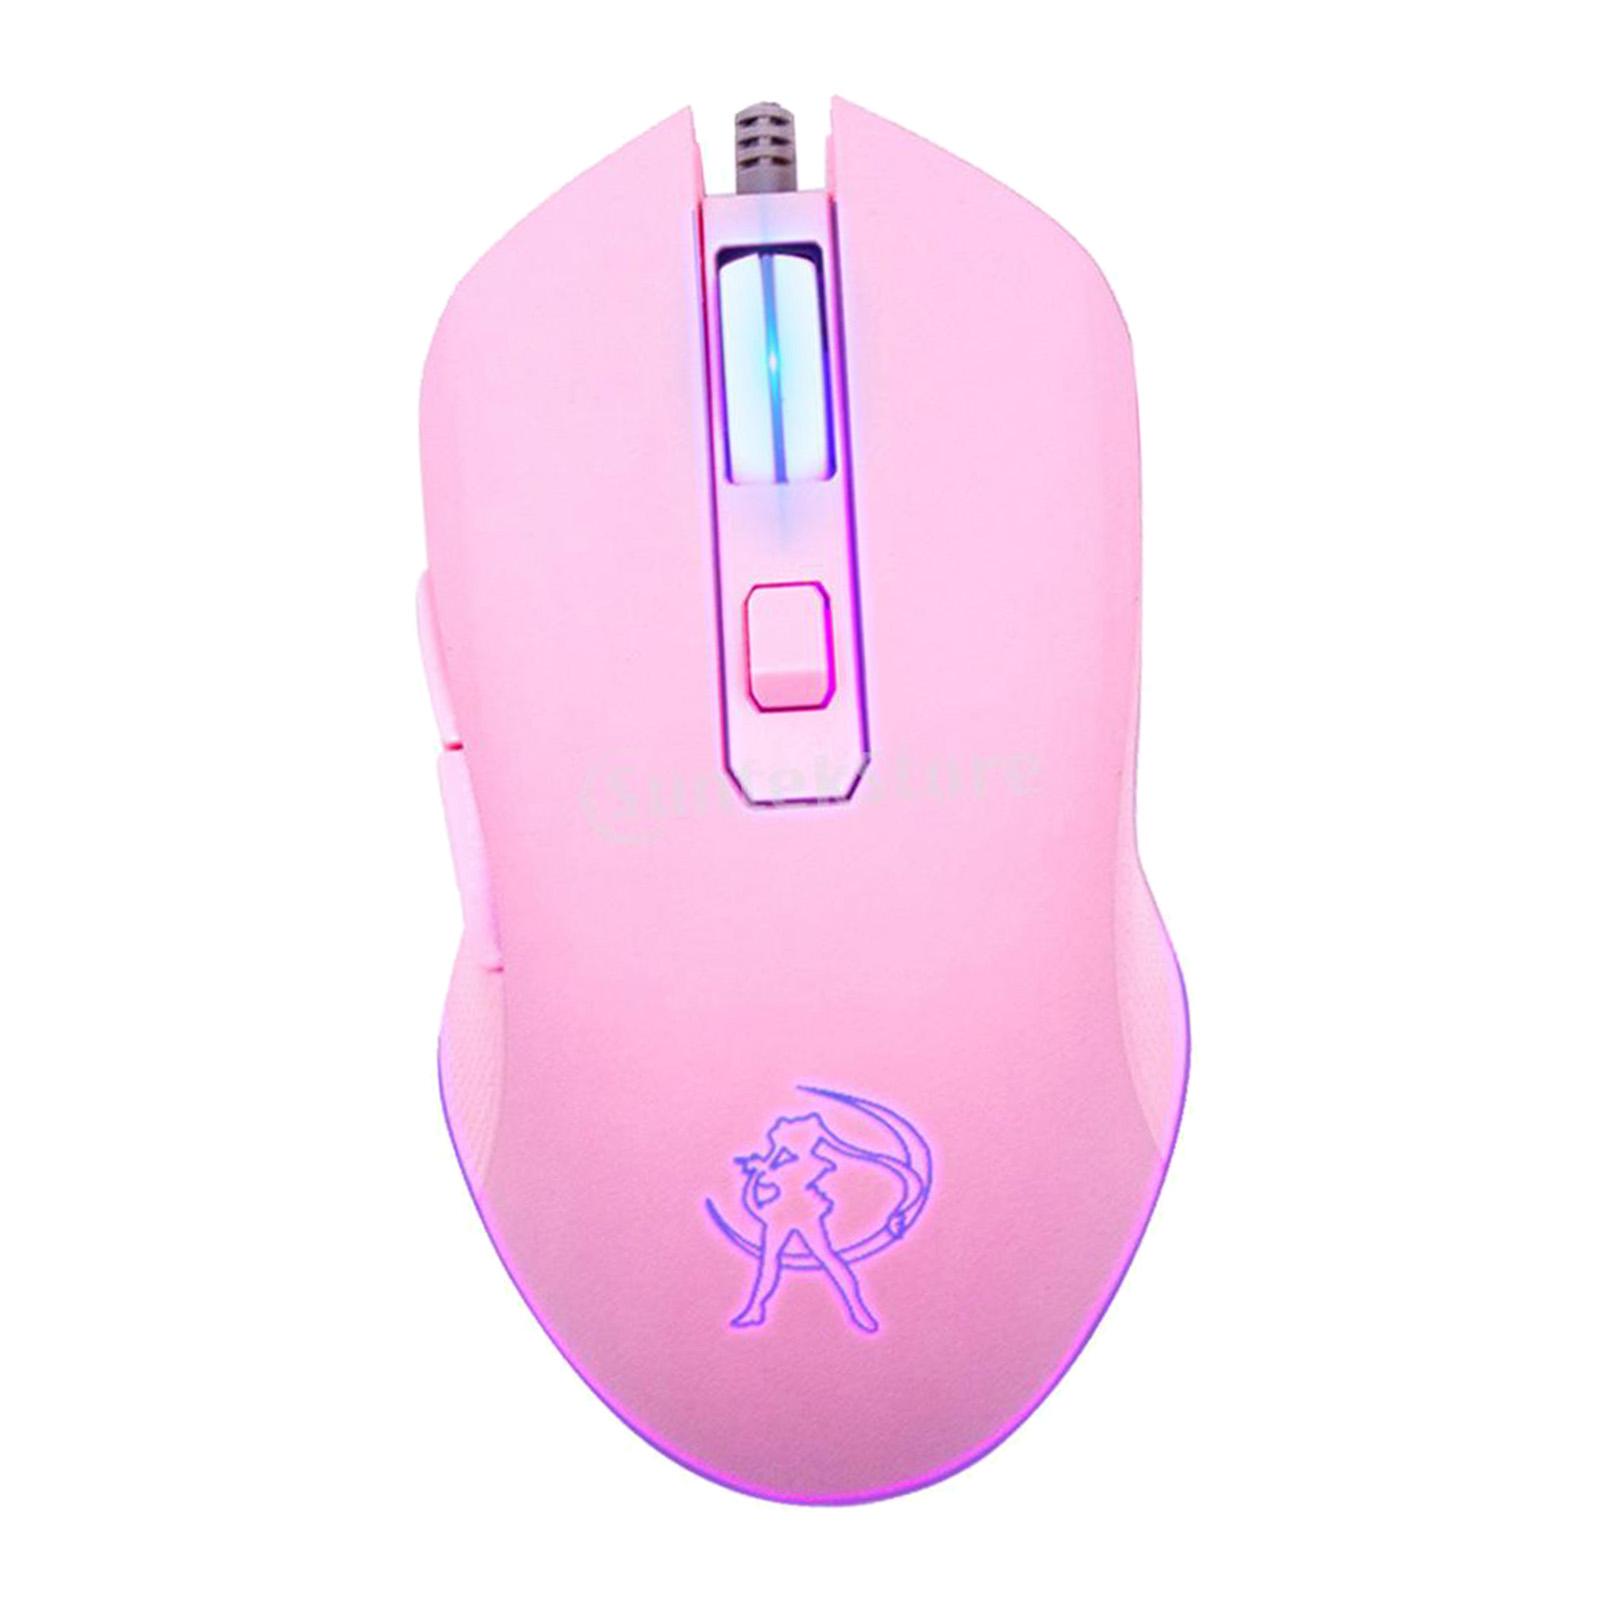 Ergonomic USB Wired Gaming Mouse 6 Button Silent 7 Colors Led Backlit for PC